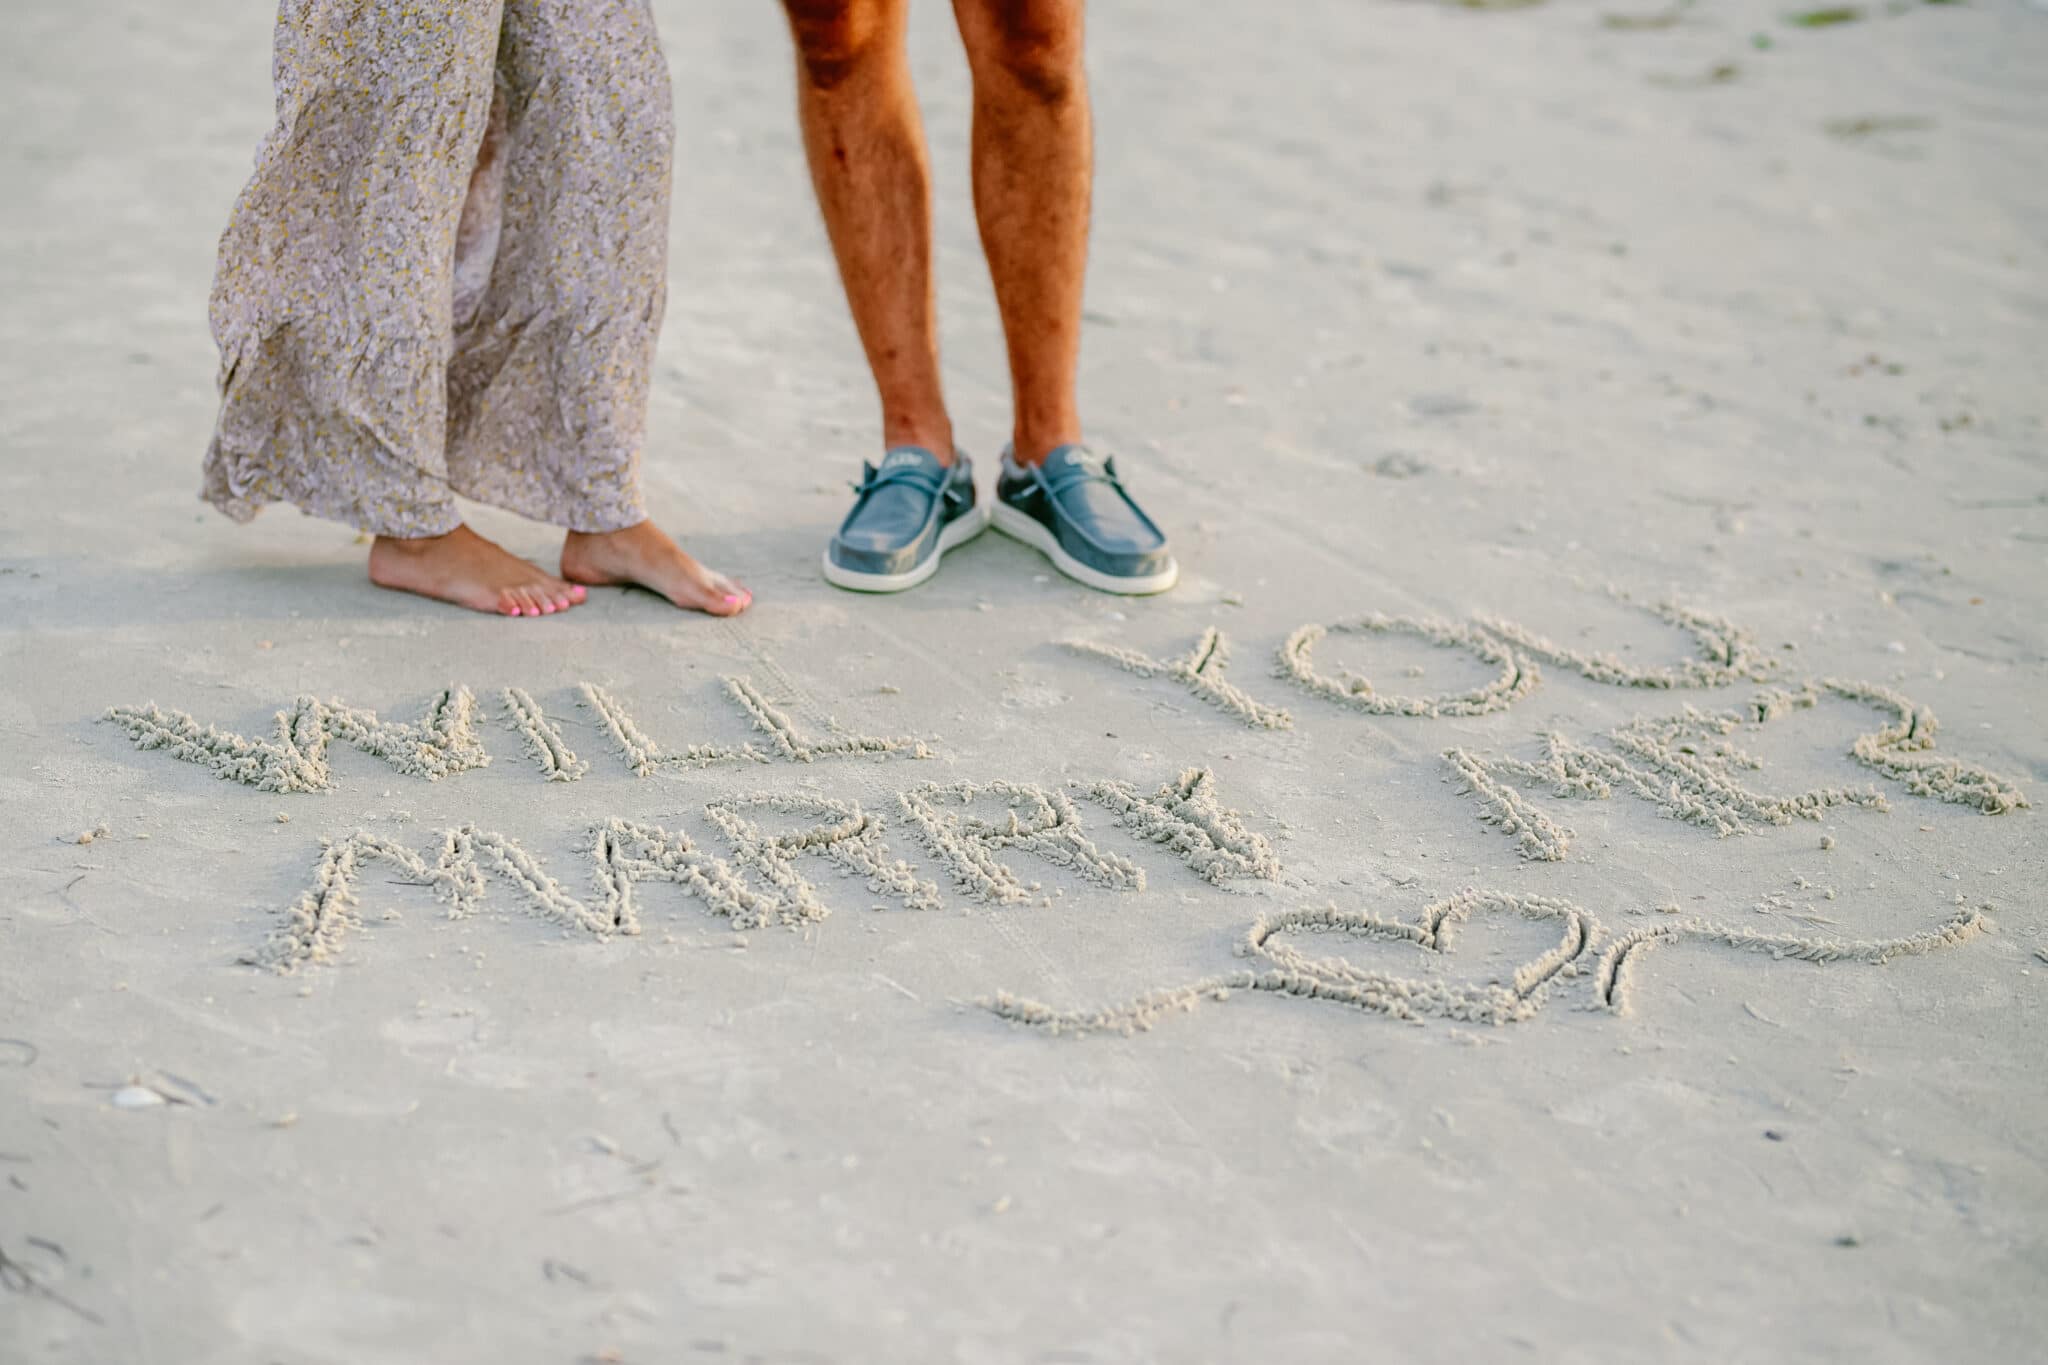 newly engaged couple standing above the words "will you marry me" written in the sand.